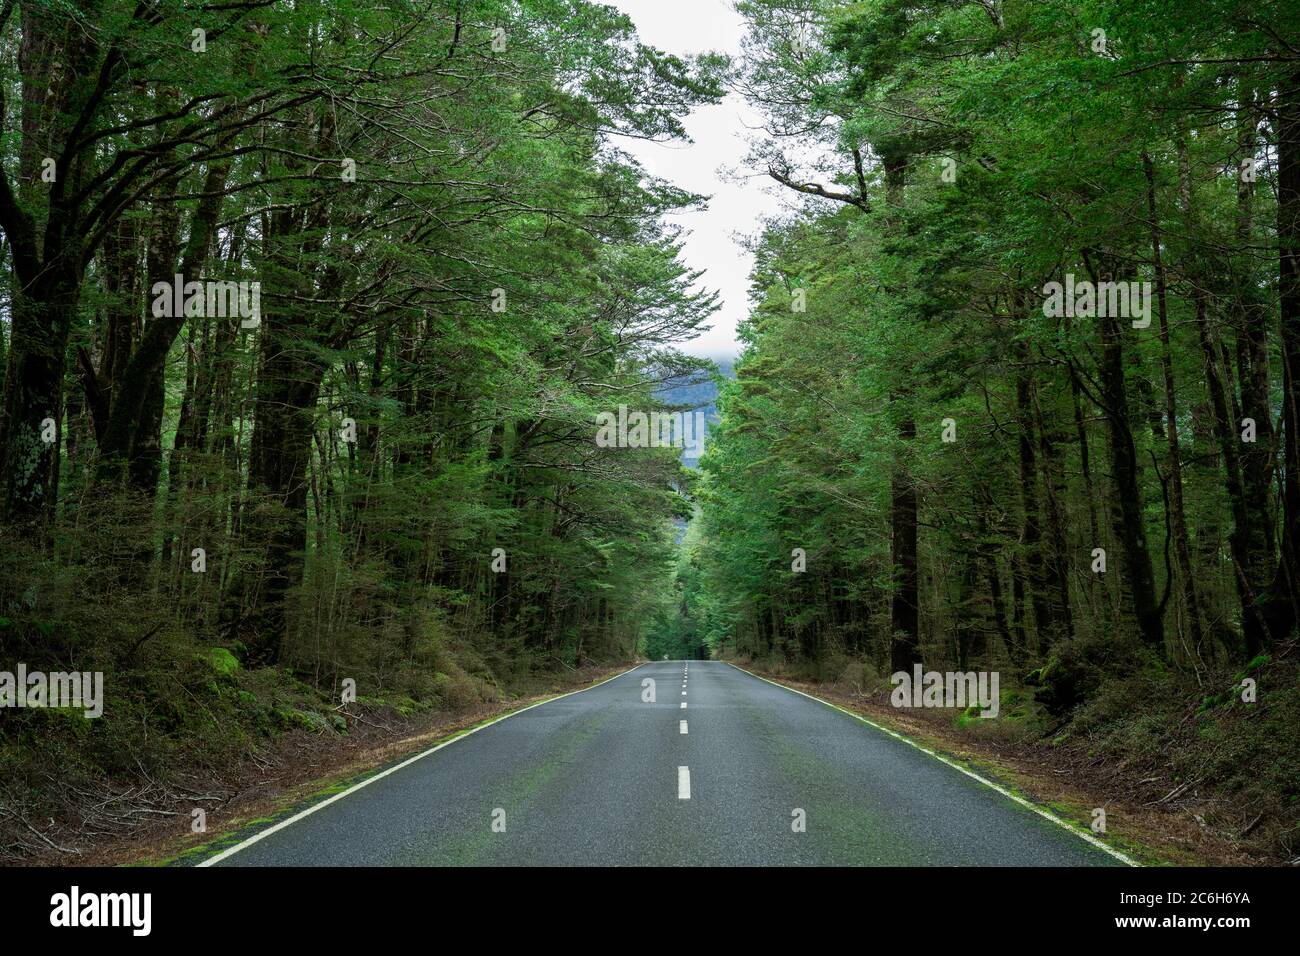 Open Highway Road in future, no cars, auto on asphalt road through green forest, trees, pines, spruces. Stock Photo